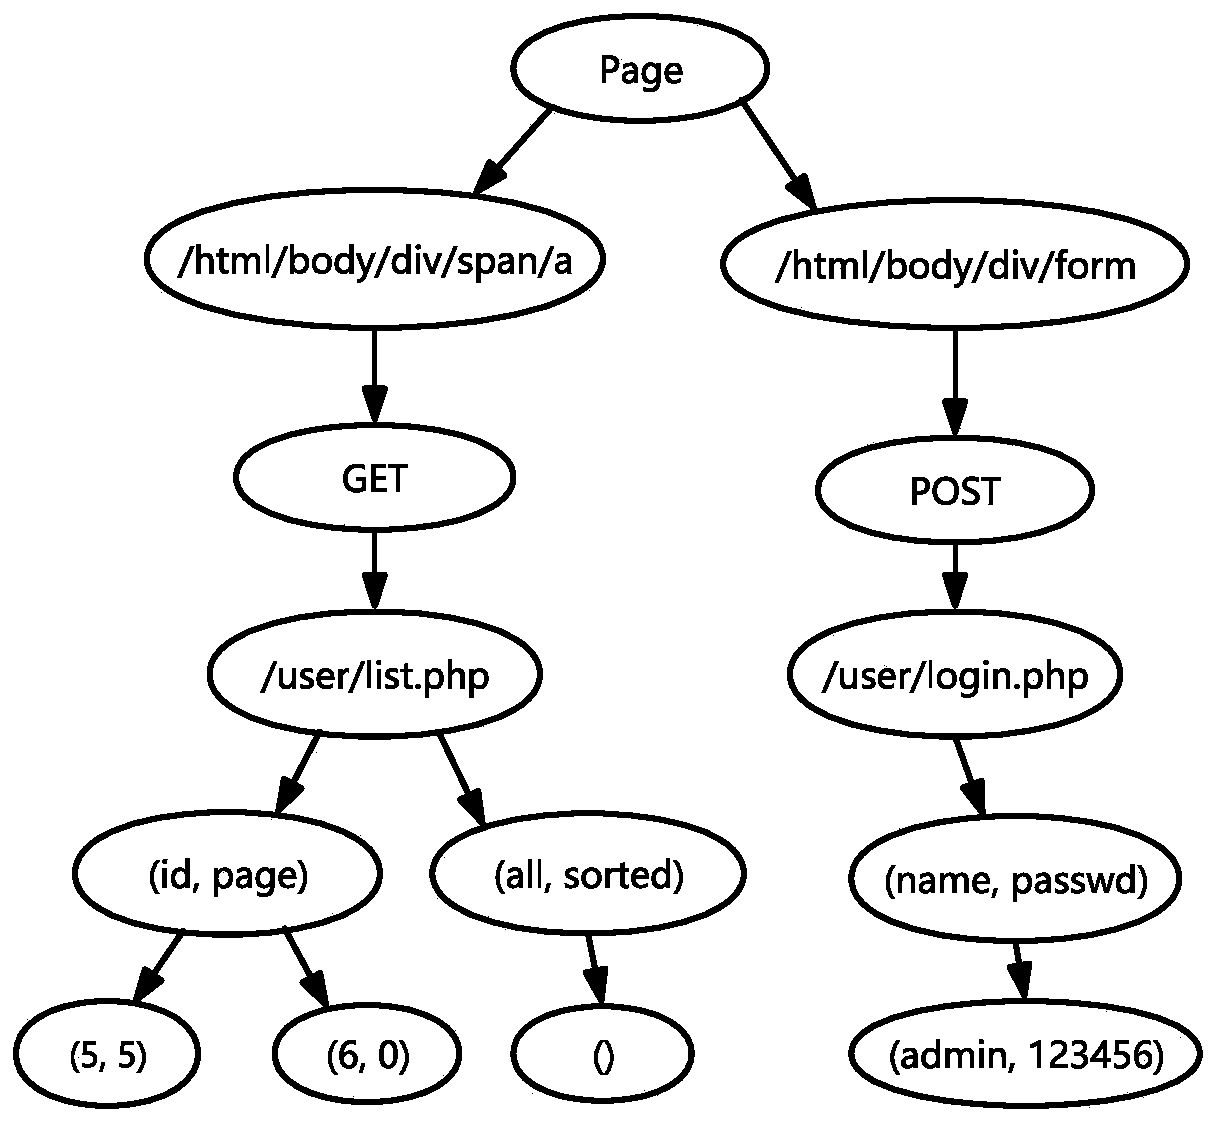 A web application reverse analysis method for xss vulnerability detection